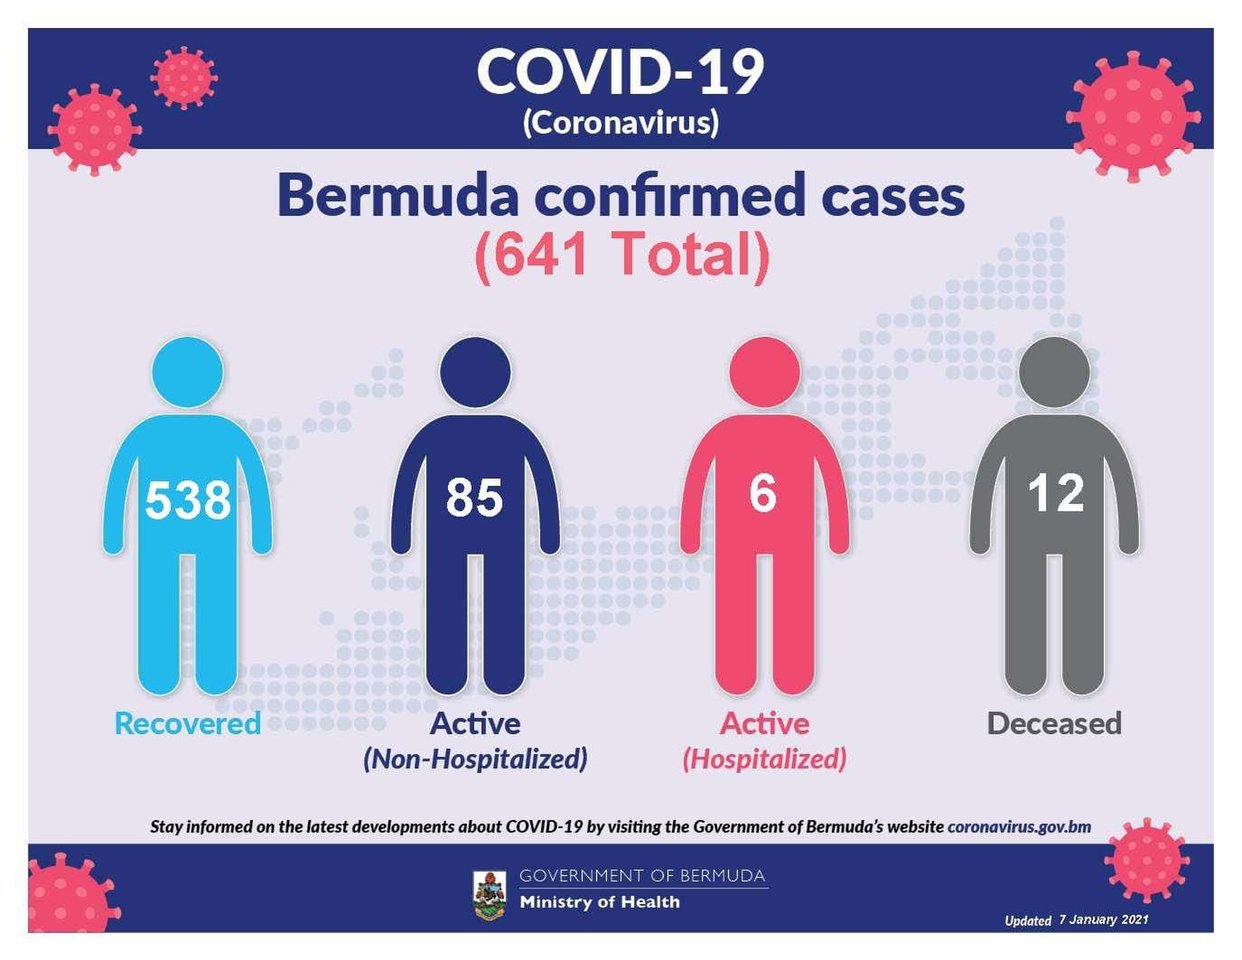 Five new COVID-19 cases reported in Bermuda, 7 January